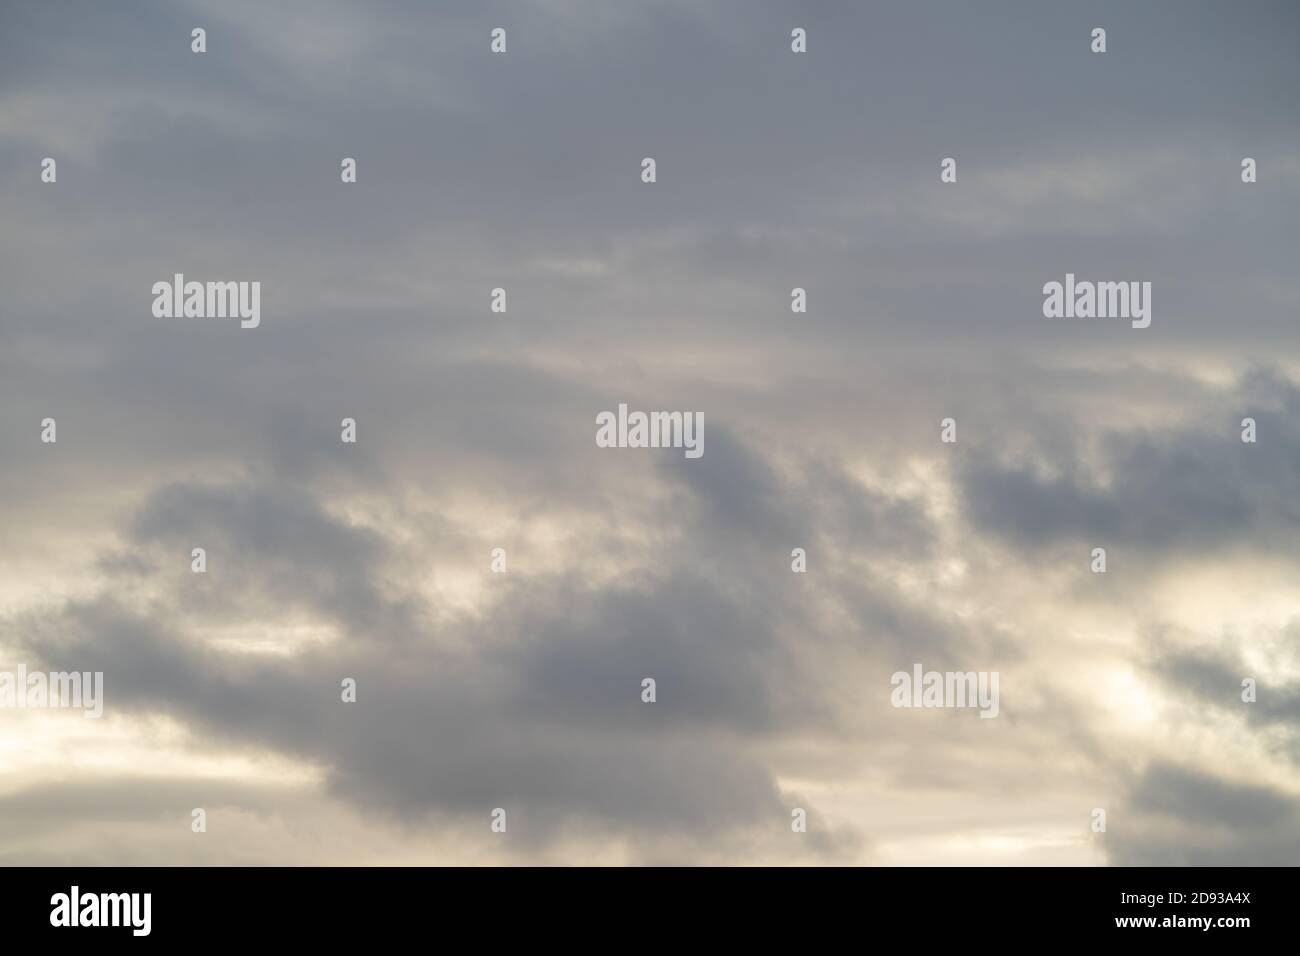 High resolution sky background image for use as sky replacement. Landscape orientation. Nimbostratus clouds Stock Photo